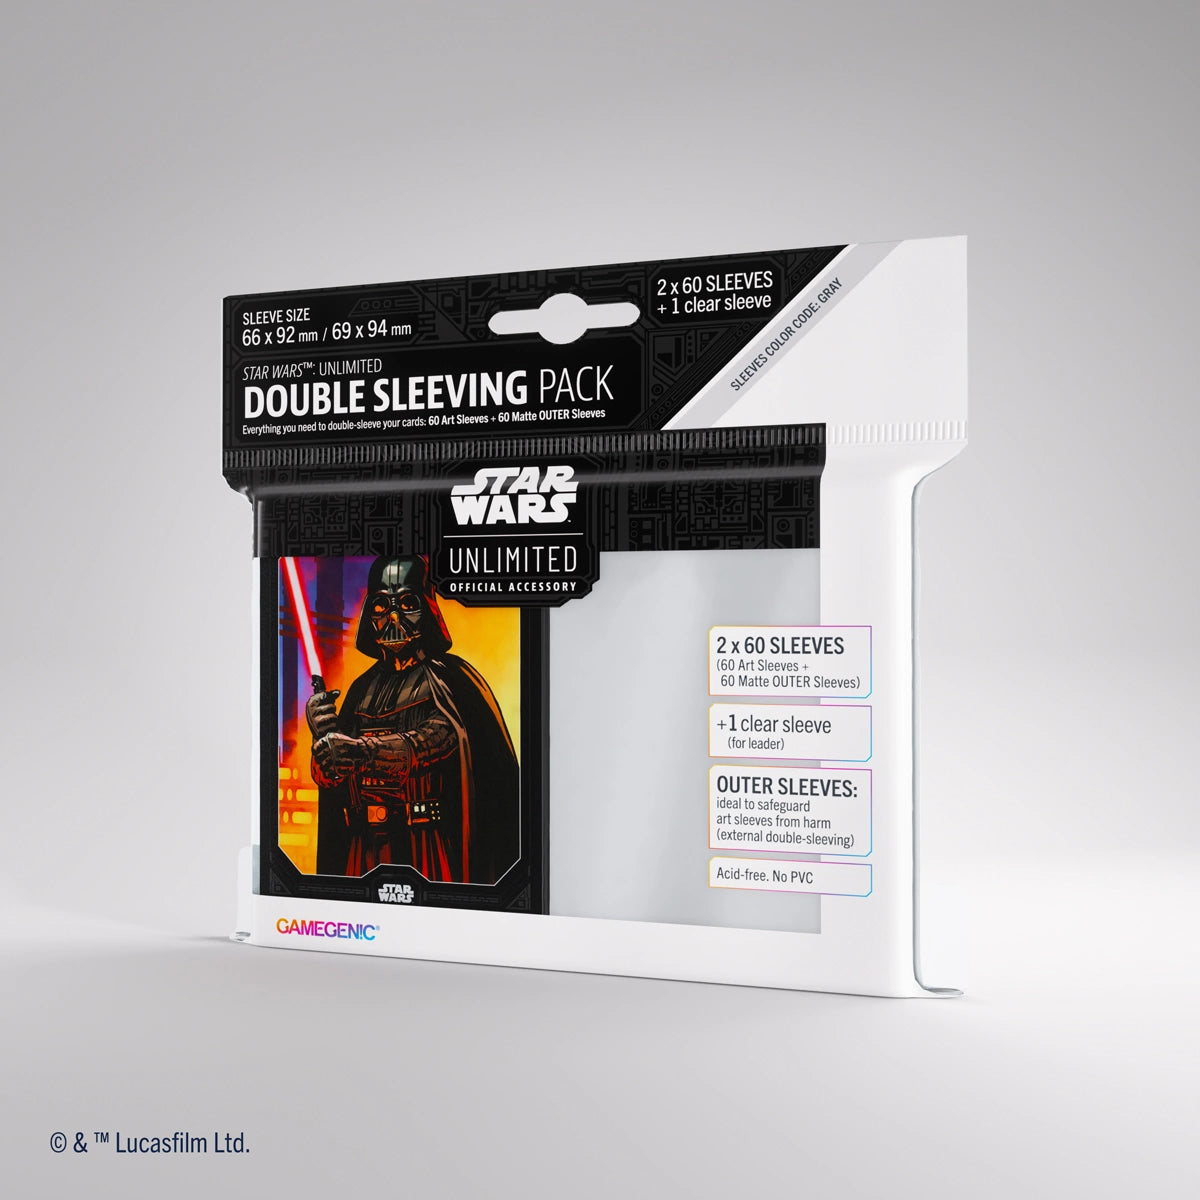 Gamegenic Star Wars: Unlimited Double Sleeving Pack